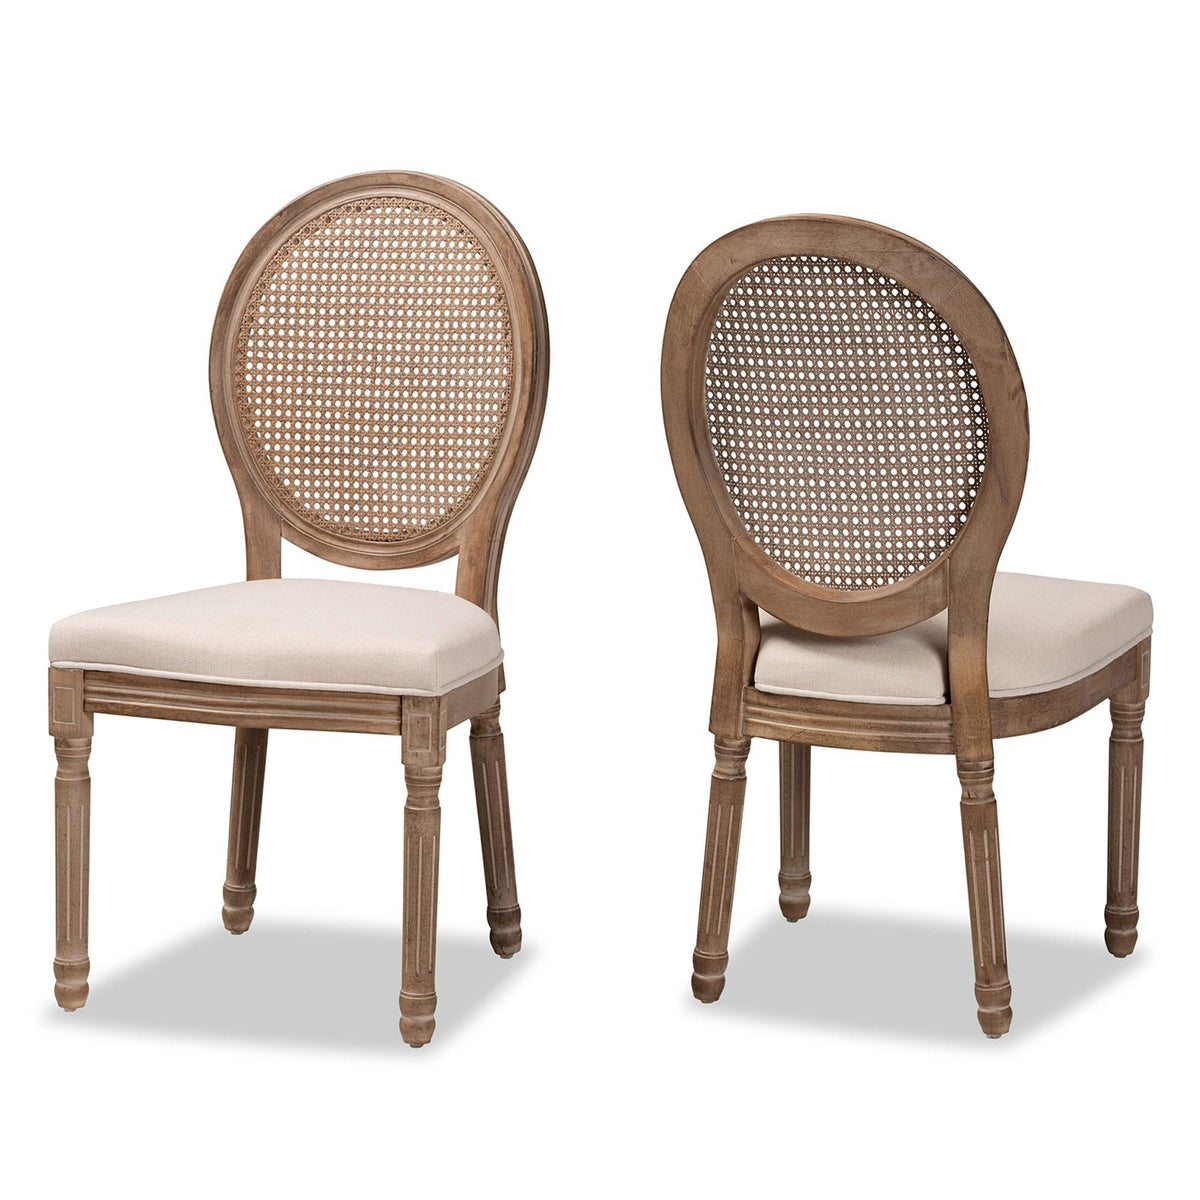 Baxton Studio Louis Traditional French Inspired Beige Fabric Upholstered And Antique Brown Finished Wood 2-Piece Dining Chair Set With Rattan - W-LOUIS-O-05-Antique/Rattan-Chair